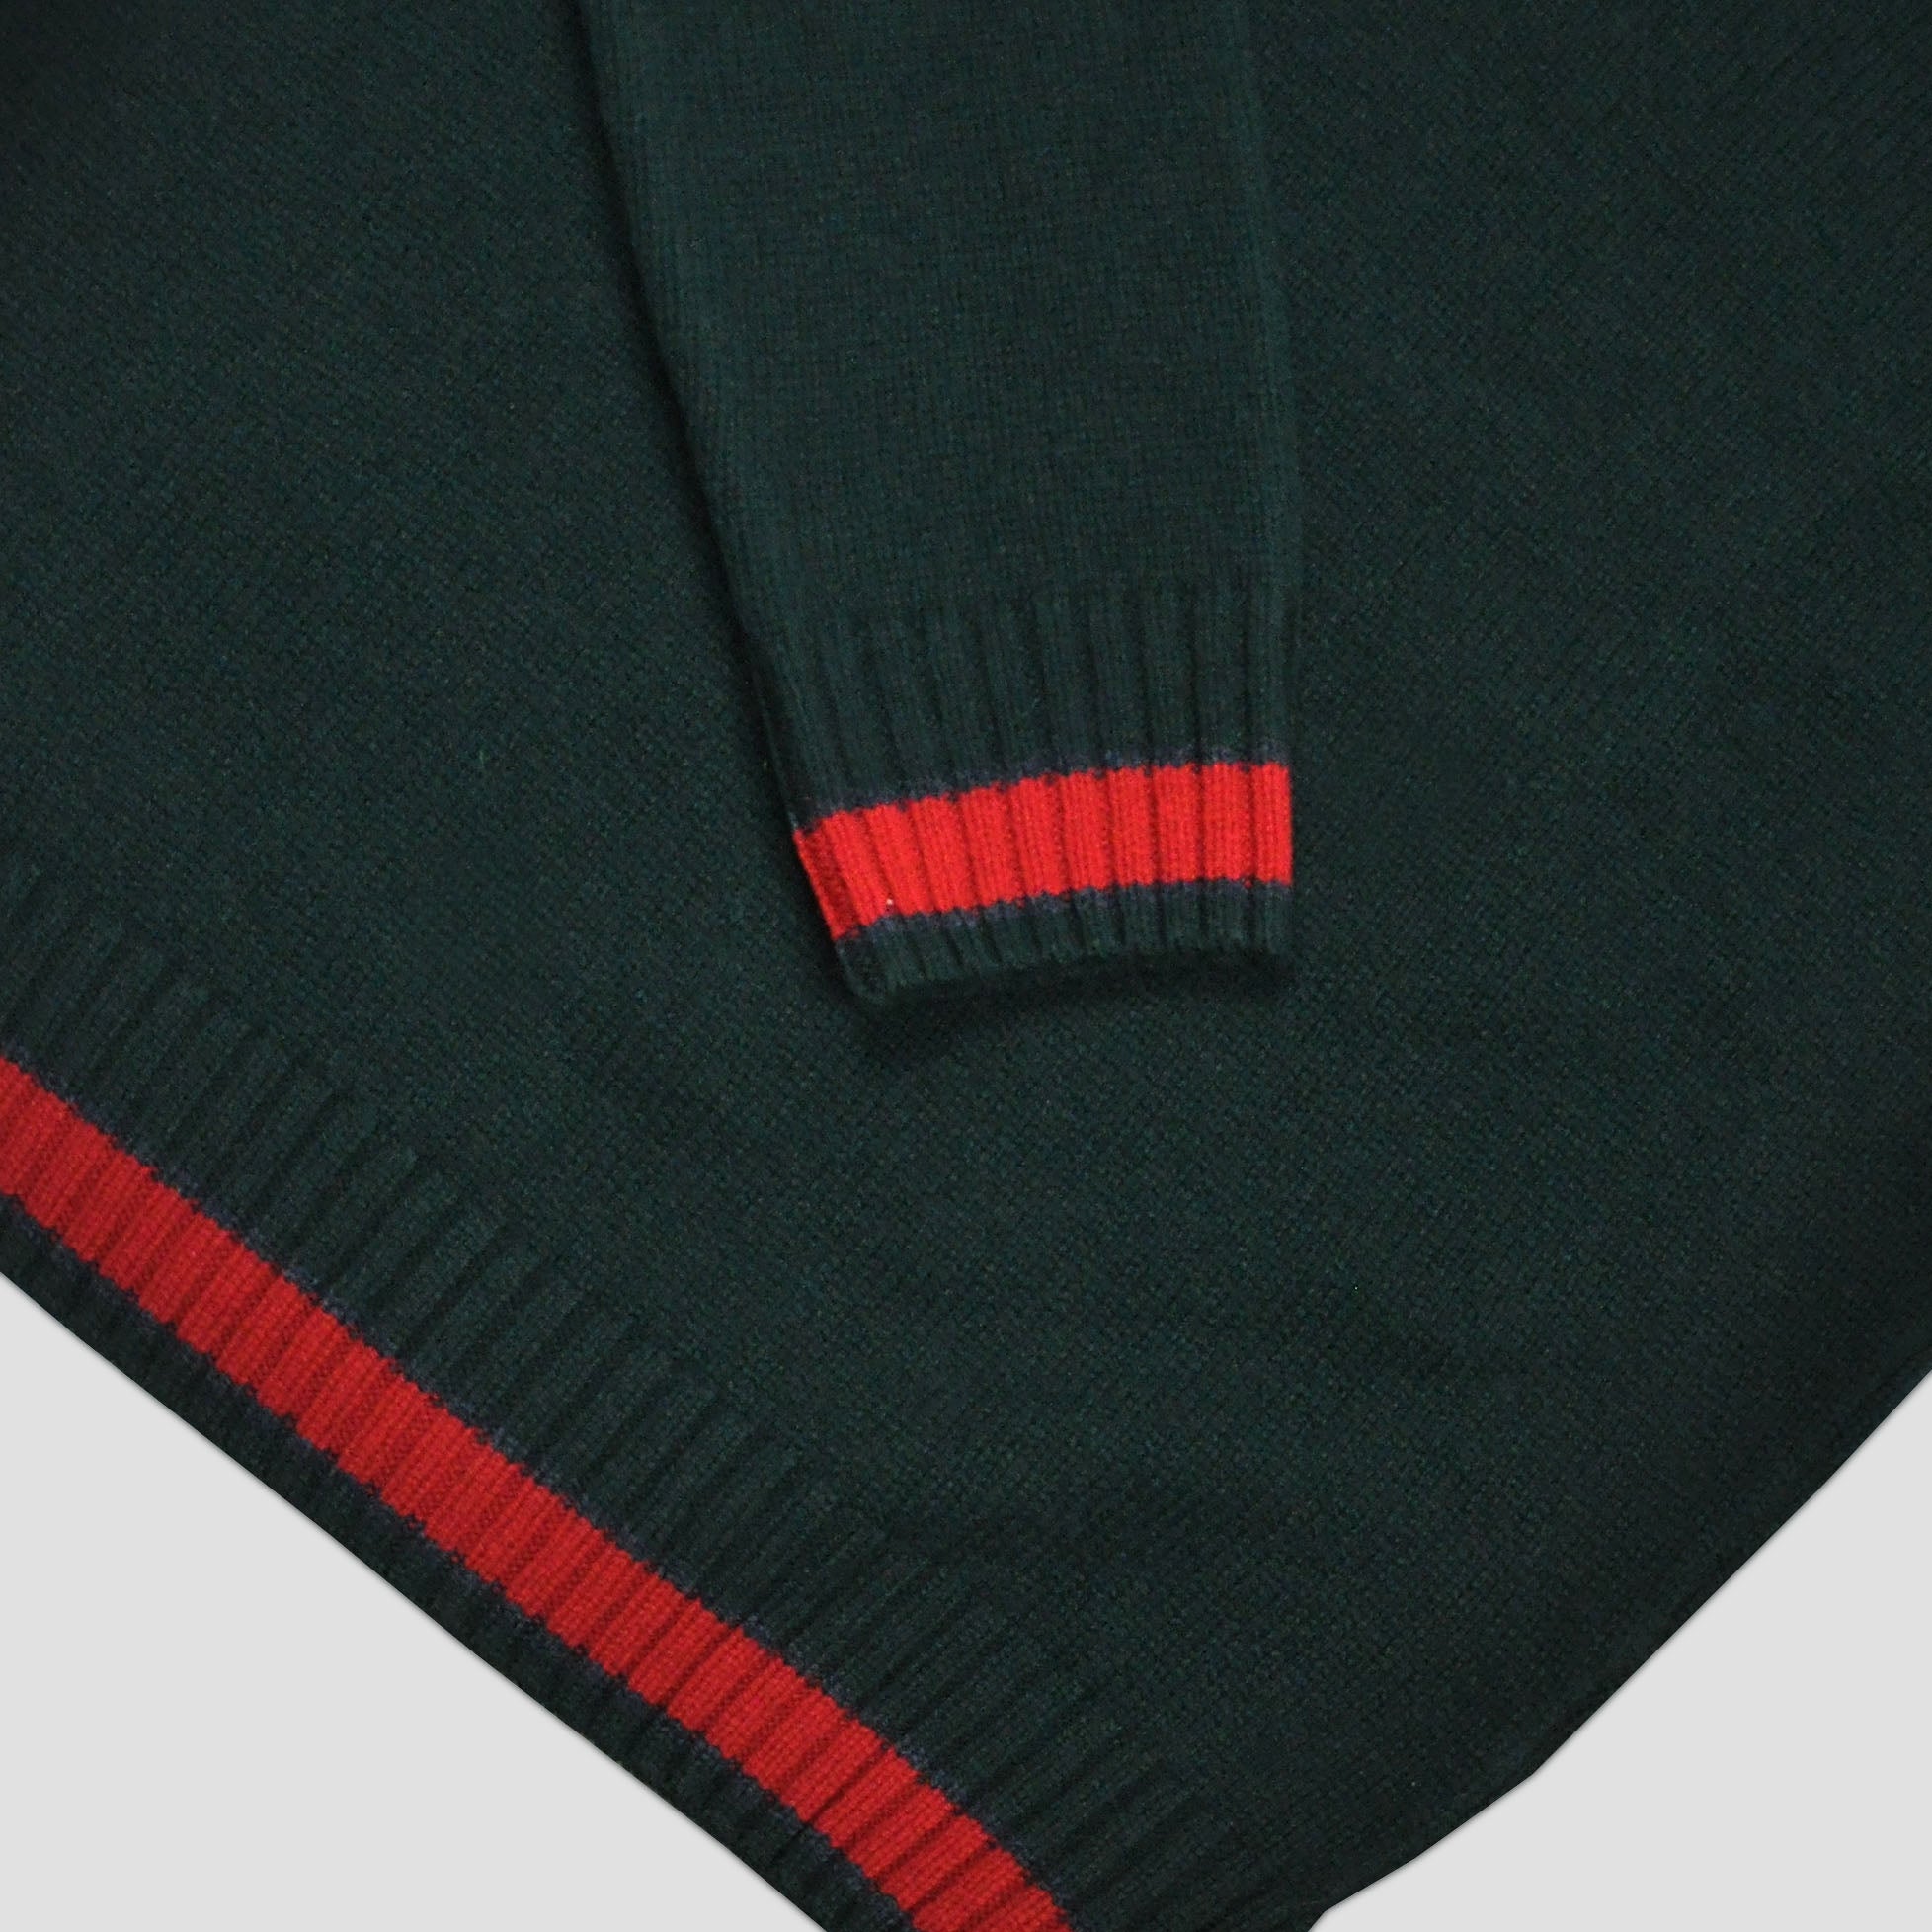 Merino Wool V-Neck Cricket Style Jumper in Bottle Green with Red Trim